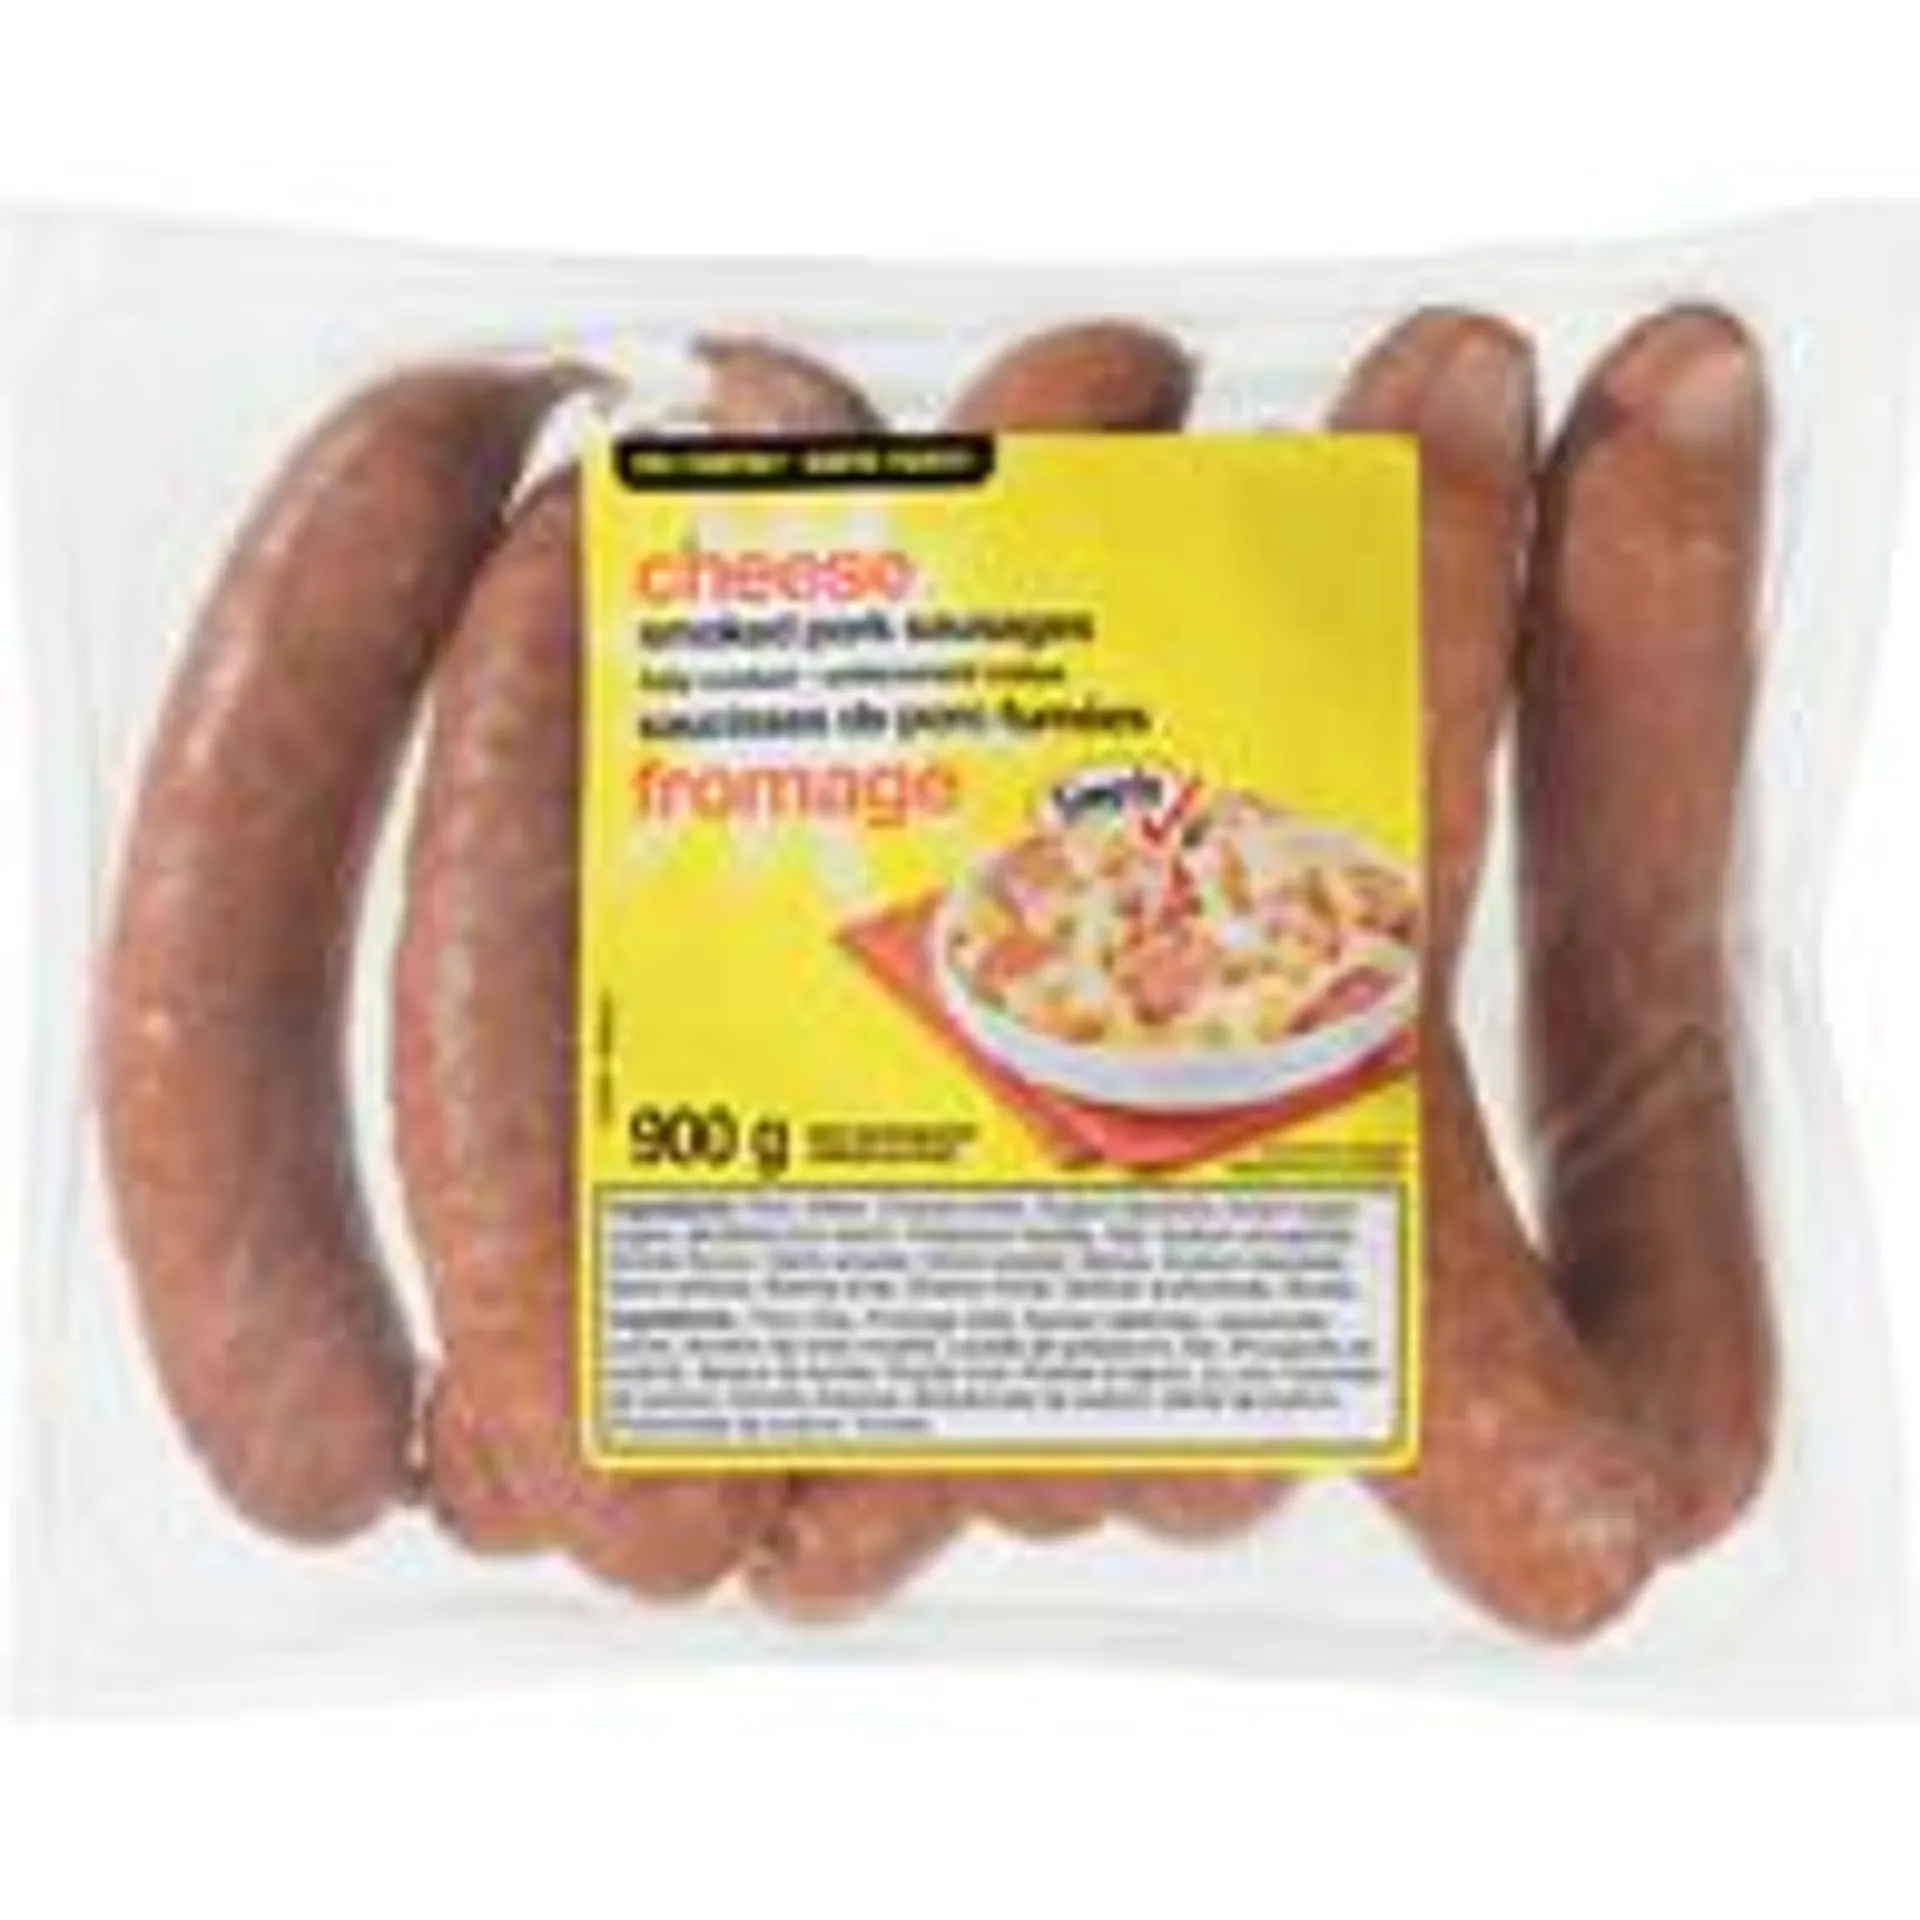 Smoked Sausages, Cheese